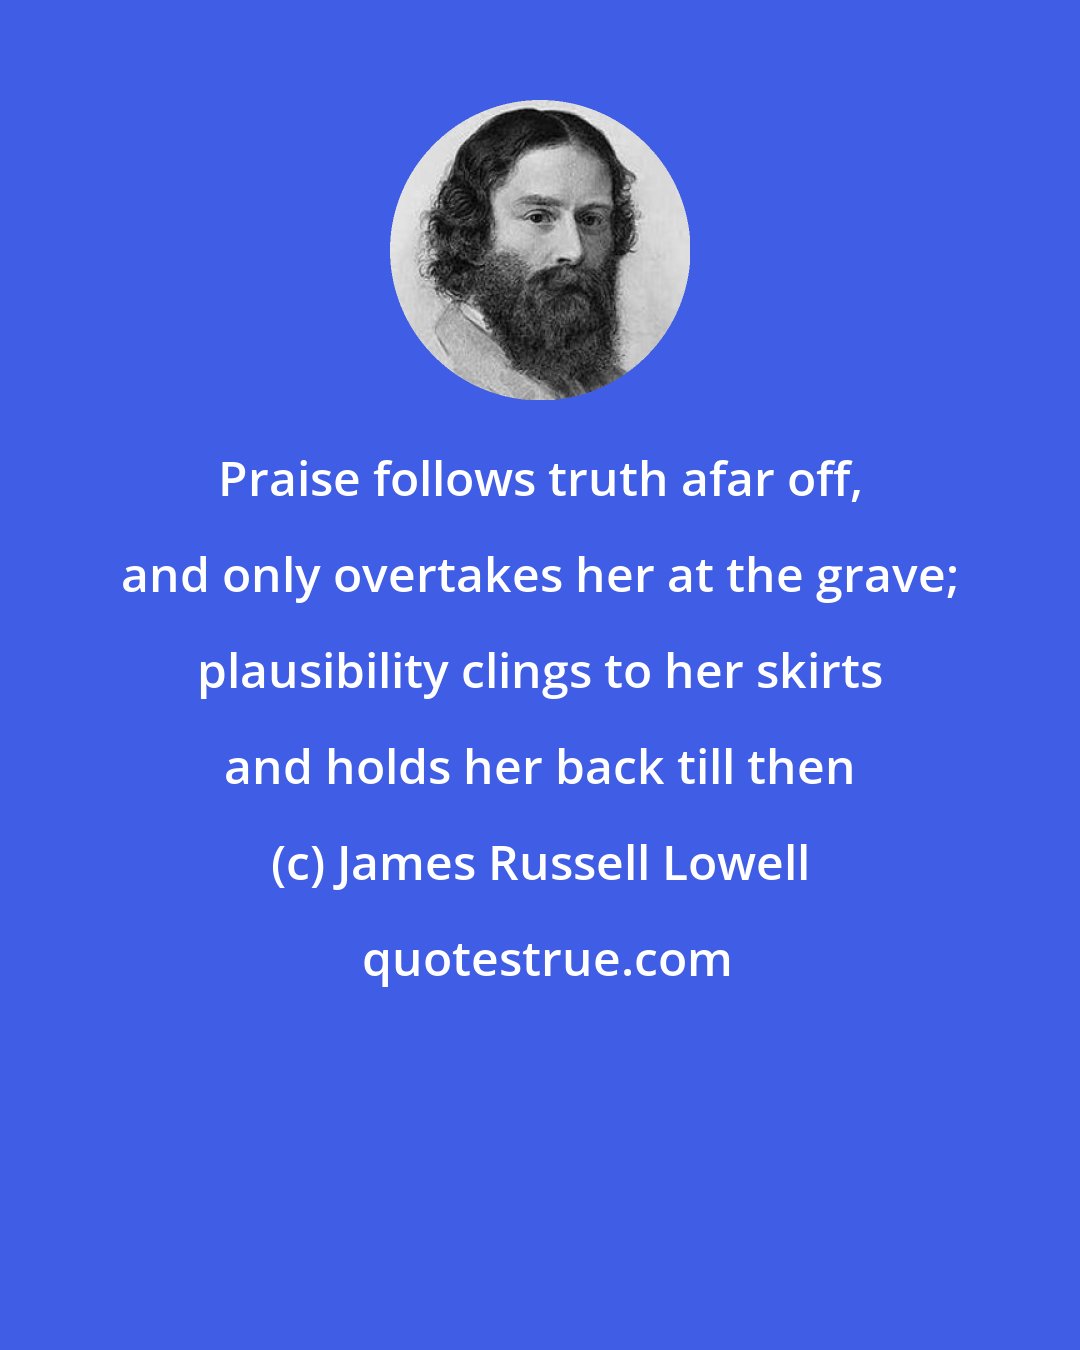 James Russell Lowell: Praise follows truth afar off, and only overtakes her at the grave; plausibility clings to her skirts and holds her back till then